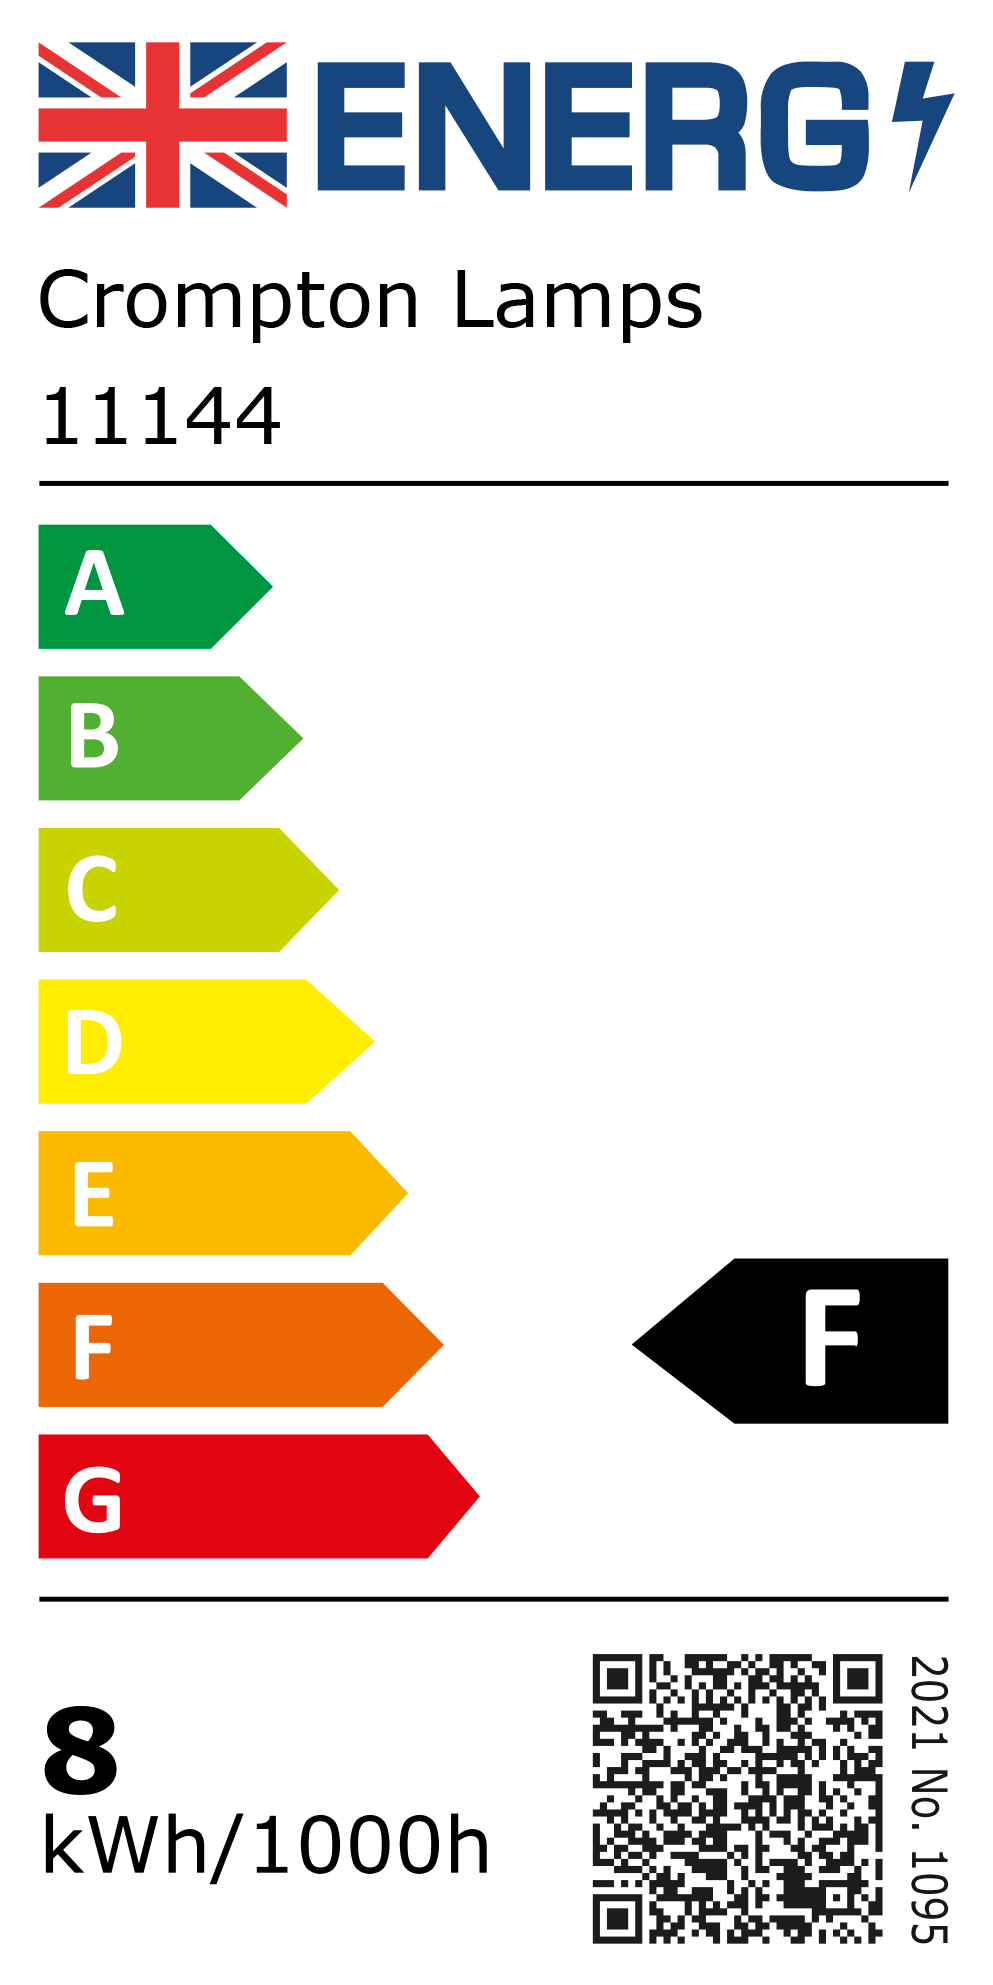 New 2021 Energy Rating Label: Stock Code 11144